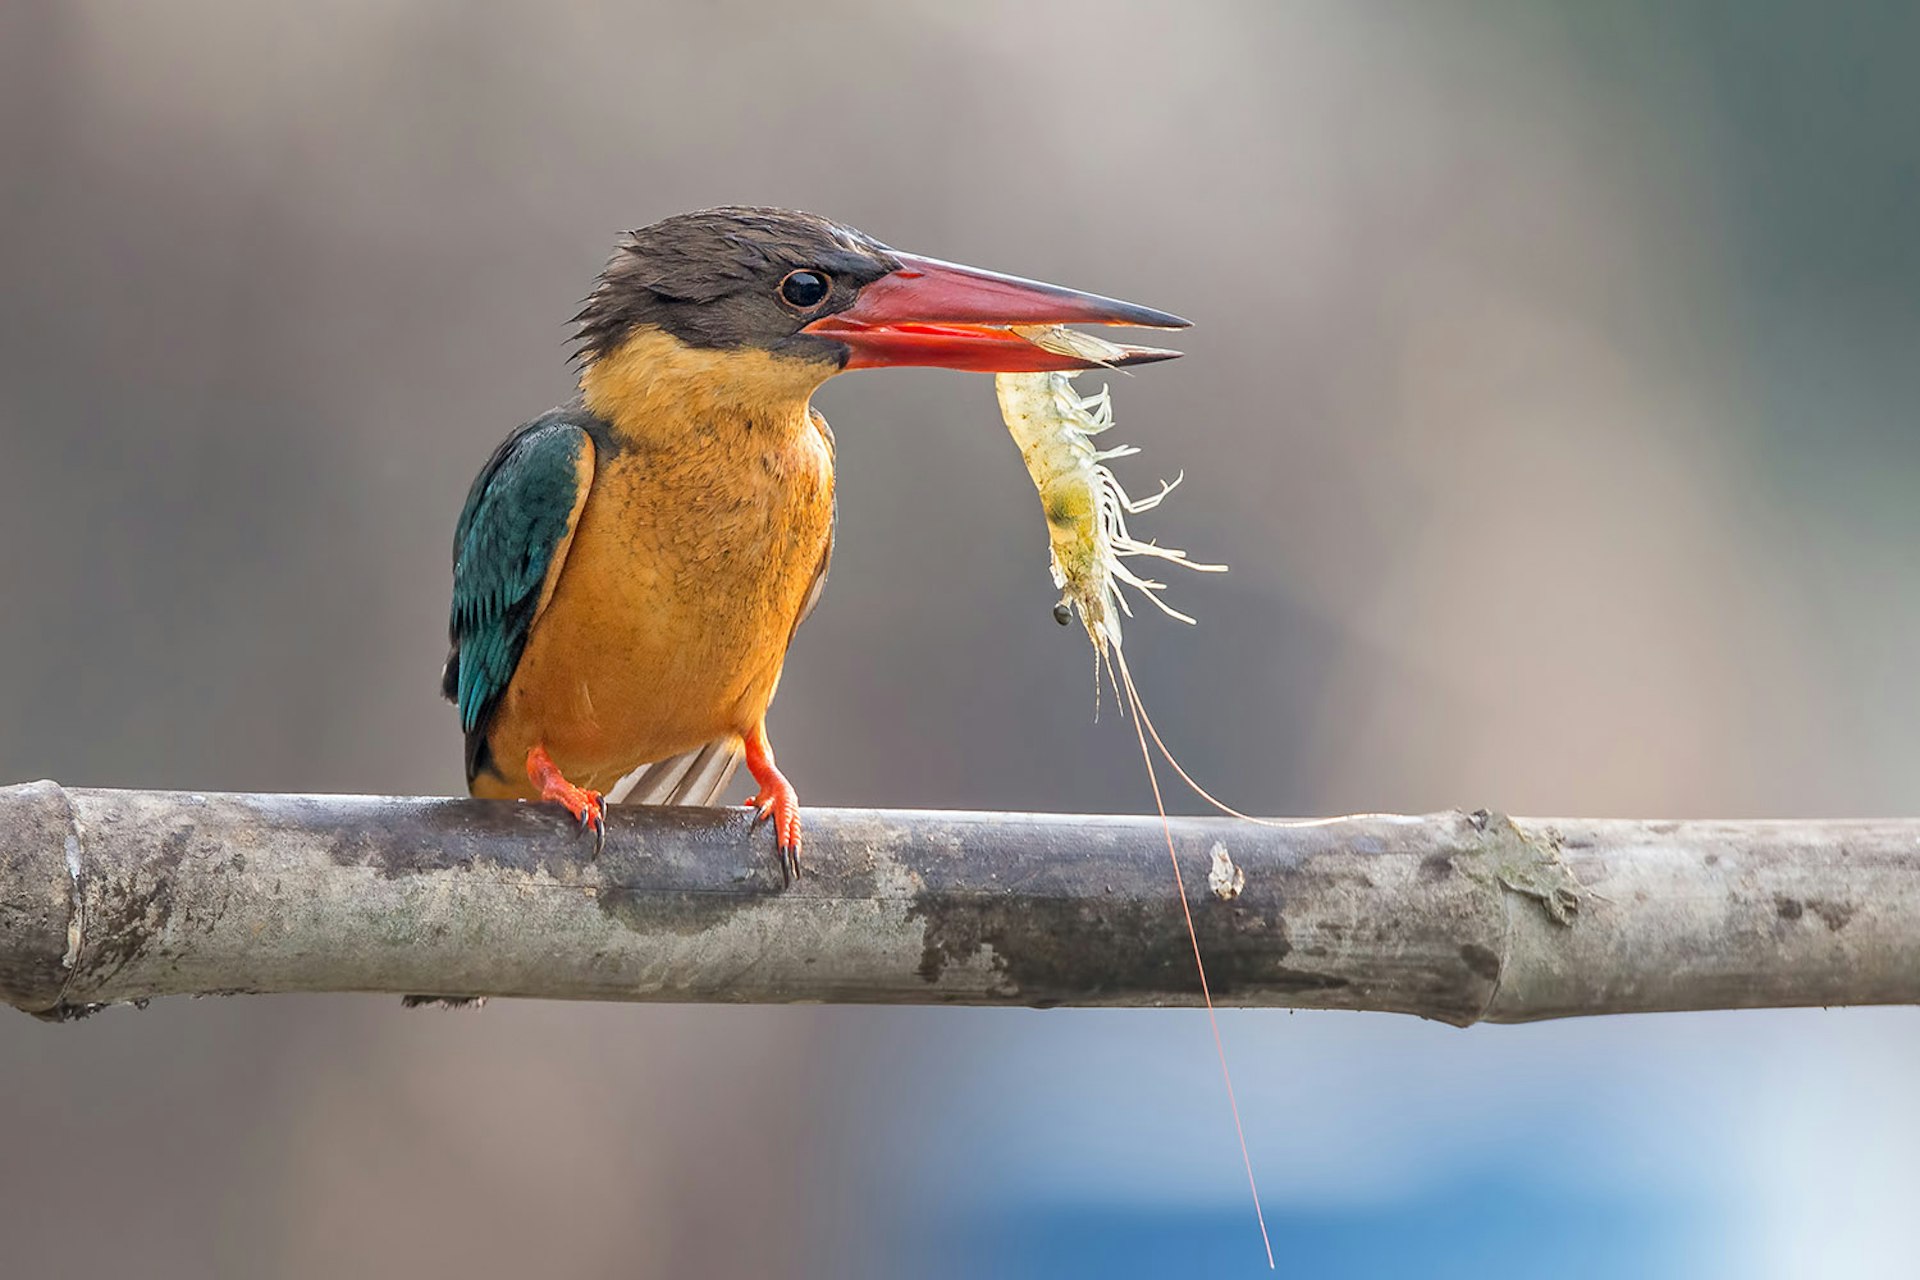 A kingfisher with orange and green feathers holds a shrimp in its beak